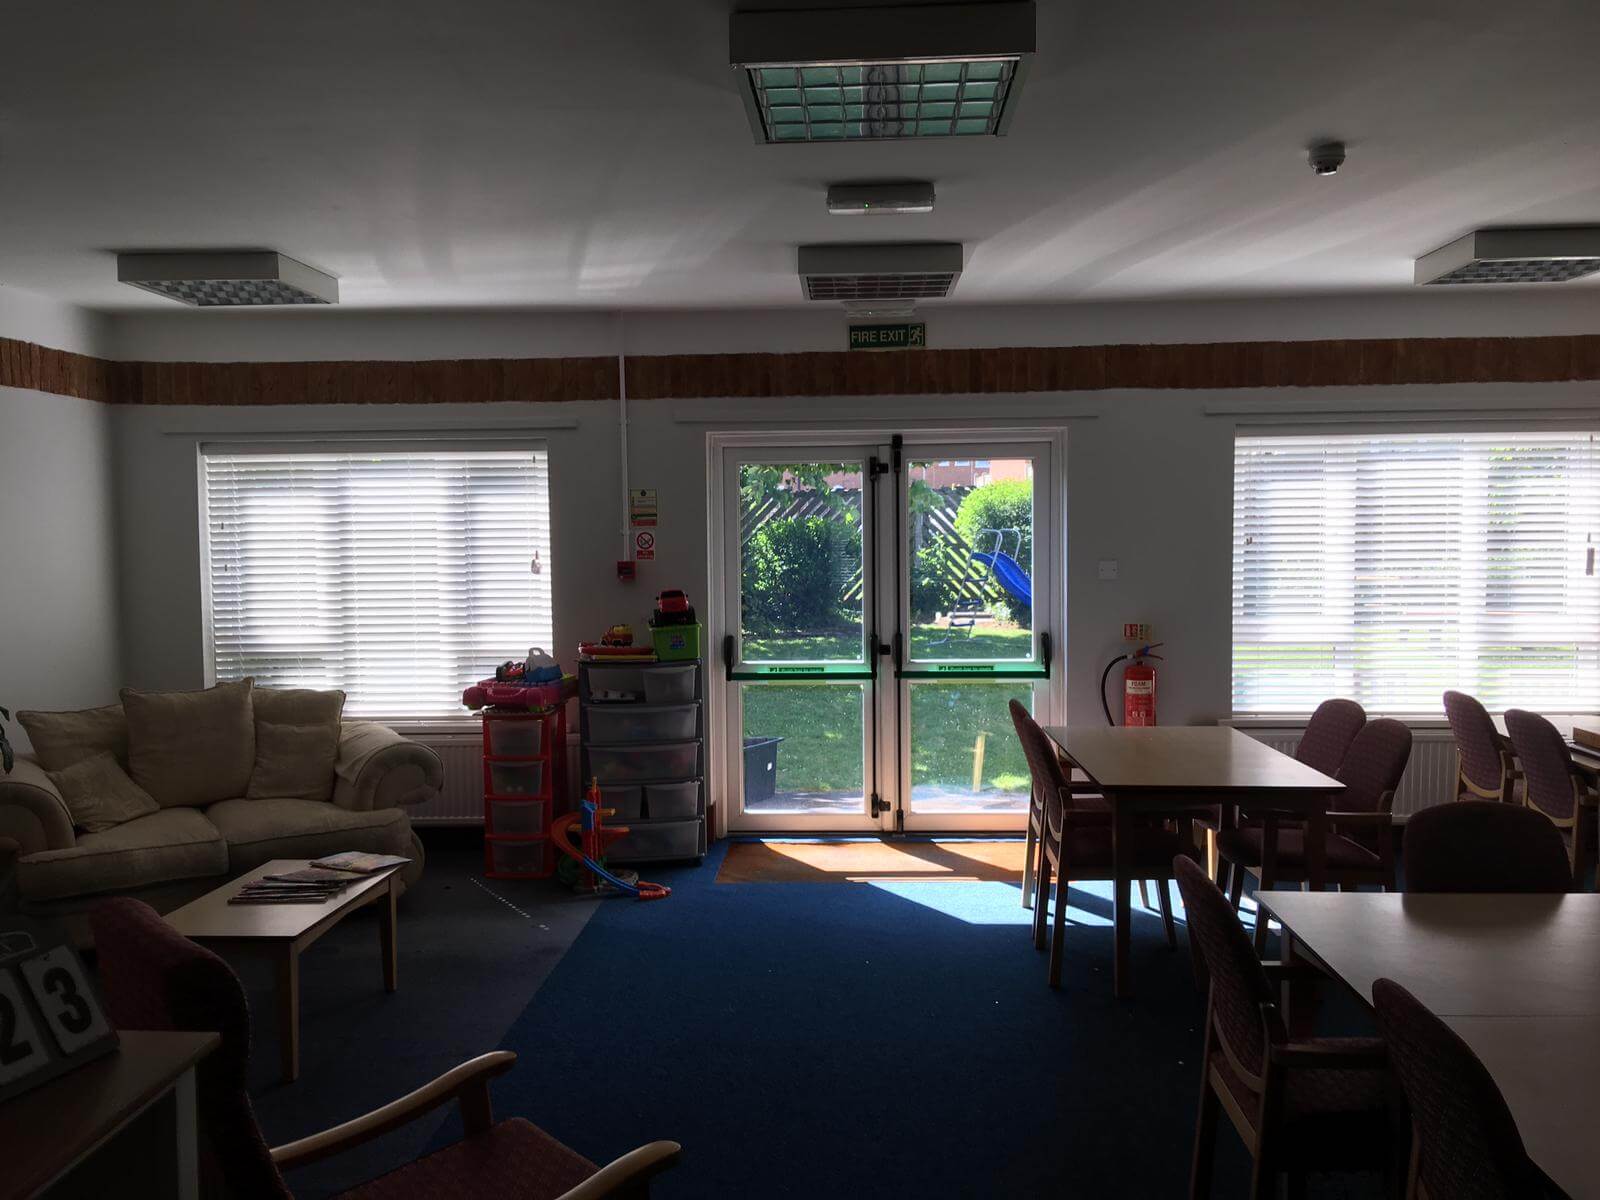 Suppliers of Commercial Blinds For Care Homes UK